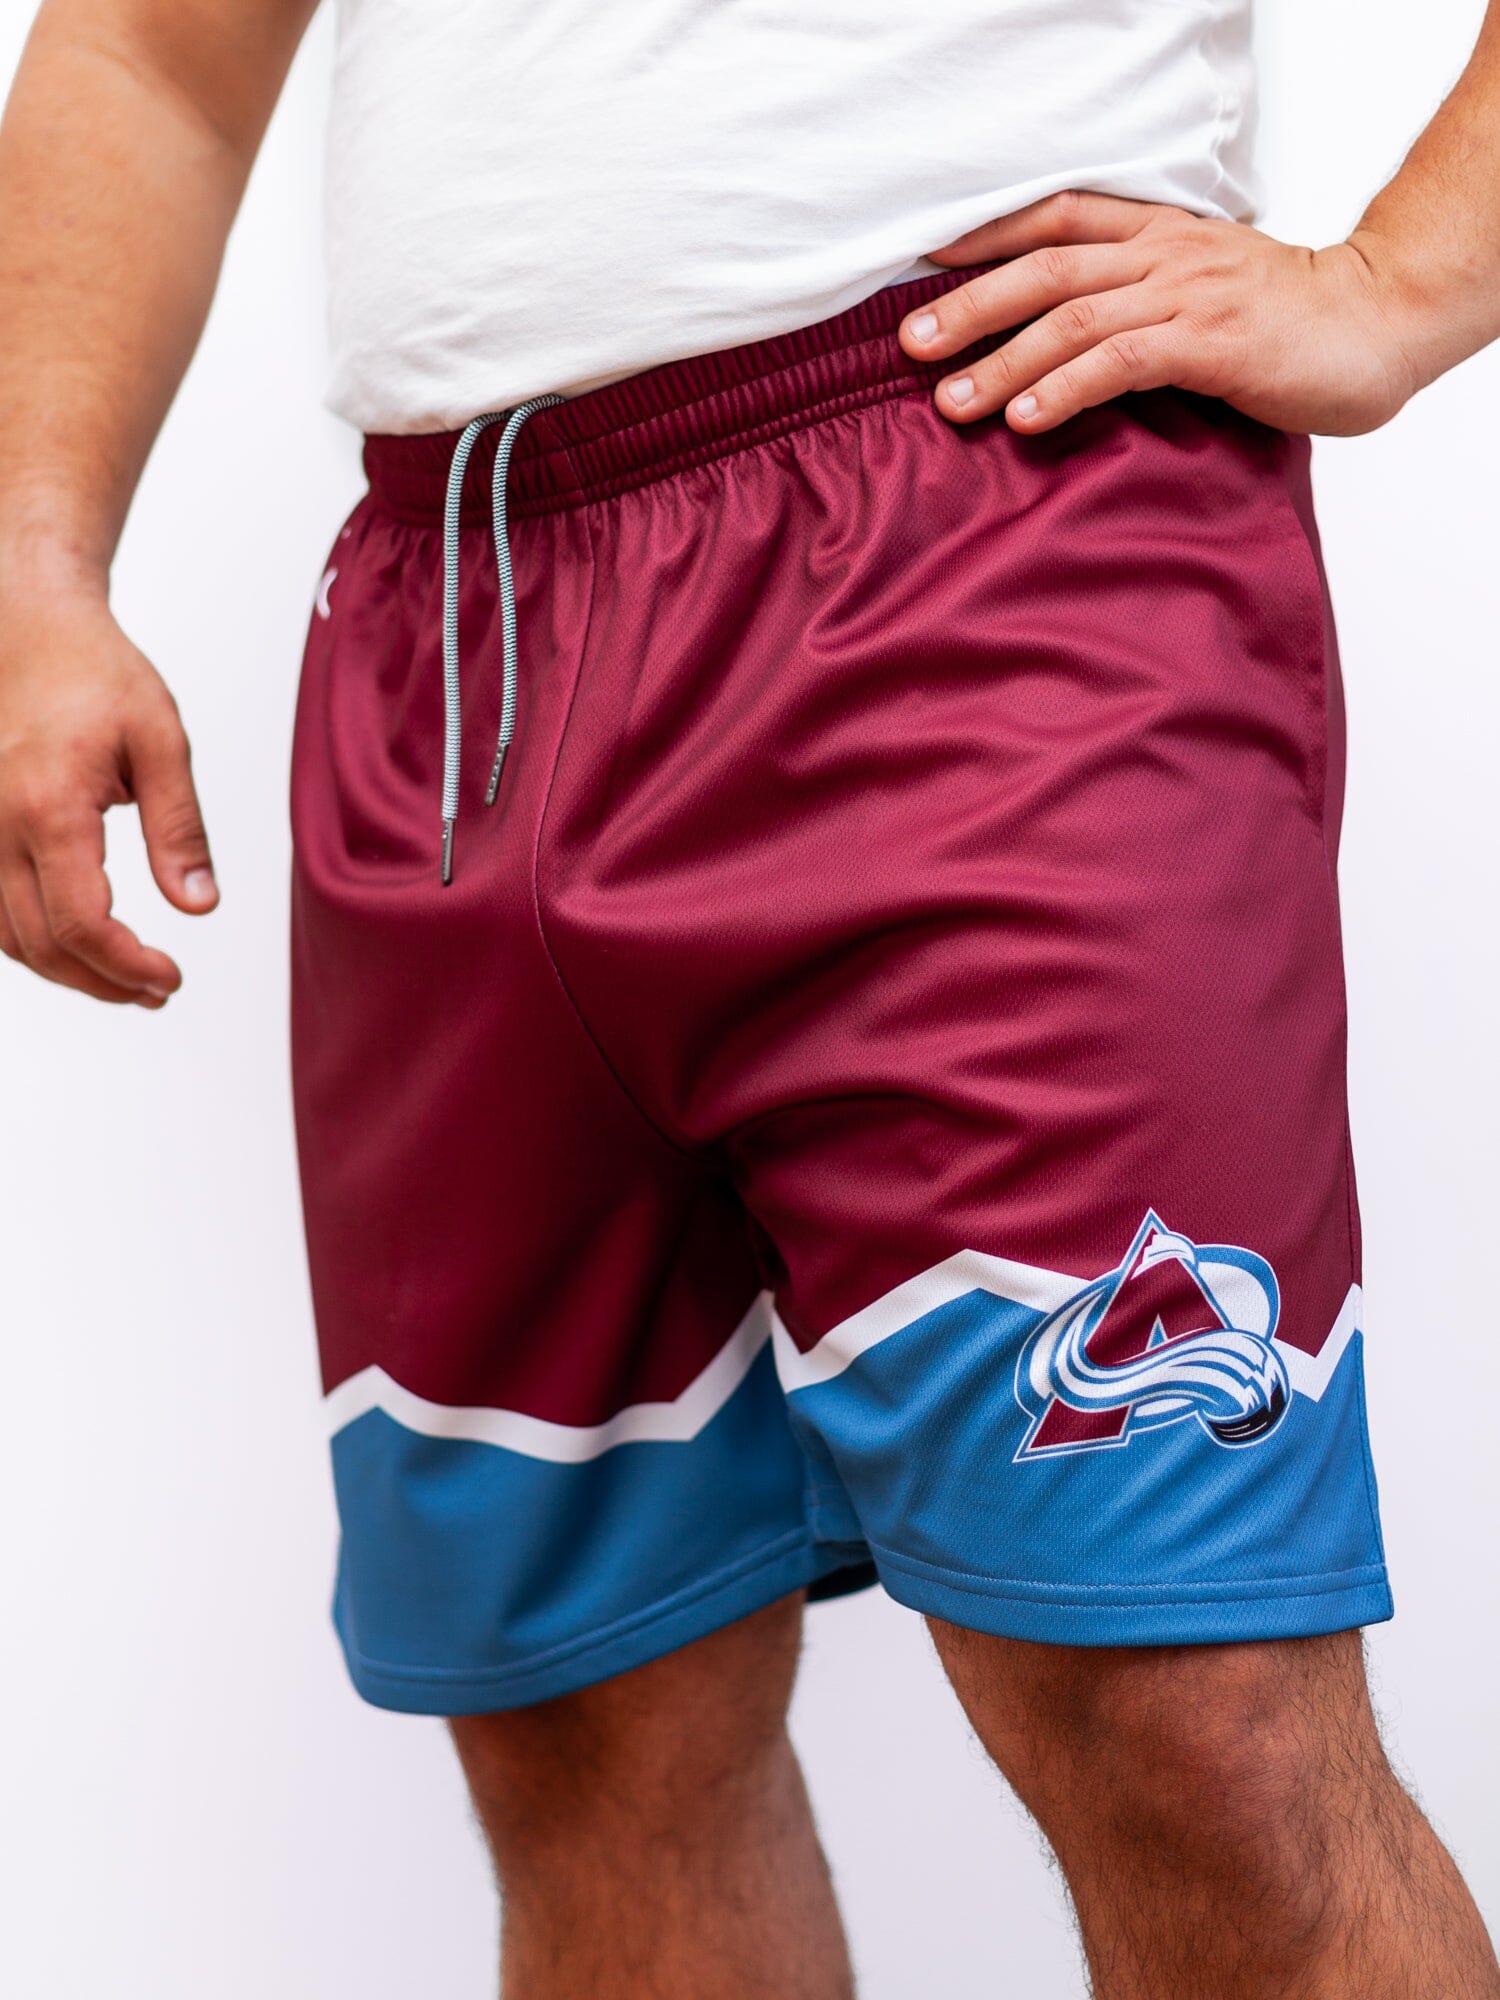 COL_AVALANCHE_SHORTS_FRONT_1